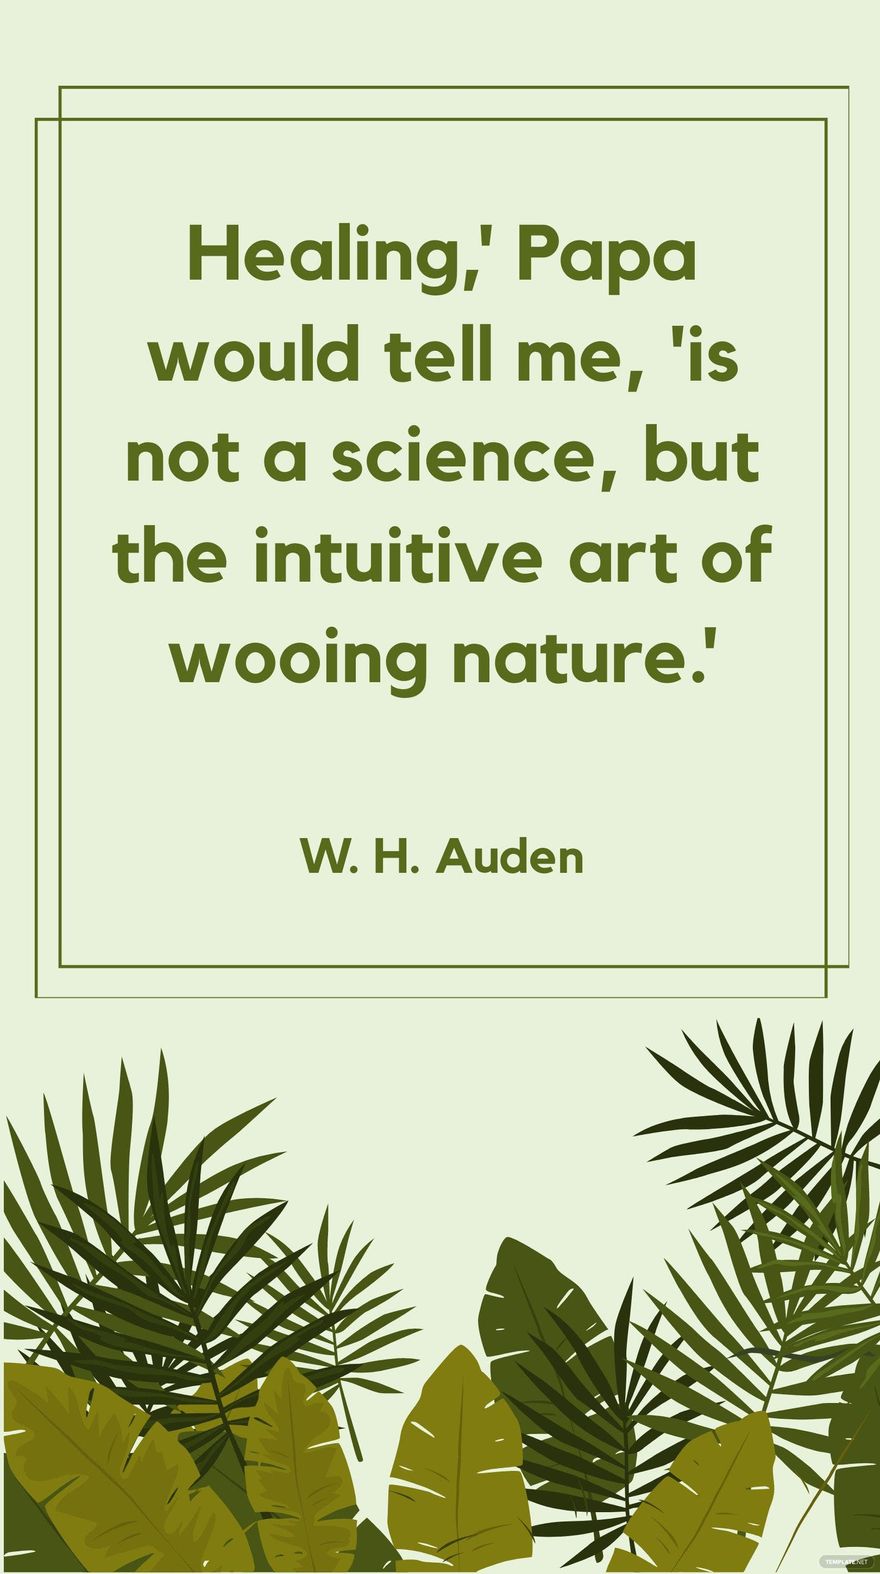 Free W. H. Auden - Healing,' Papa would tell me, 'is not a science, but the intuitive art of wooing nature.' in JPG